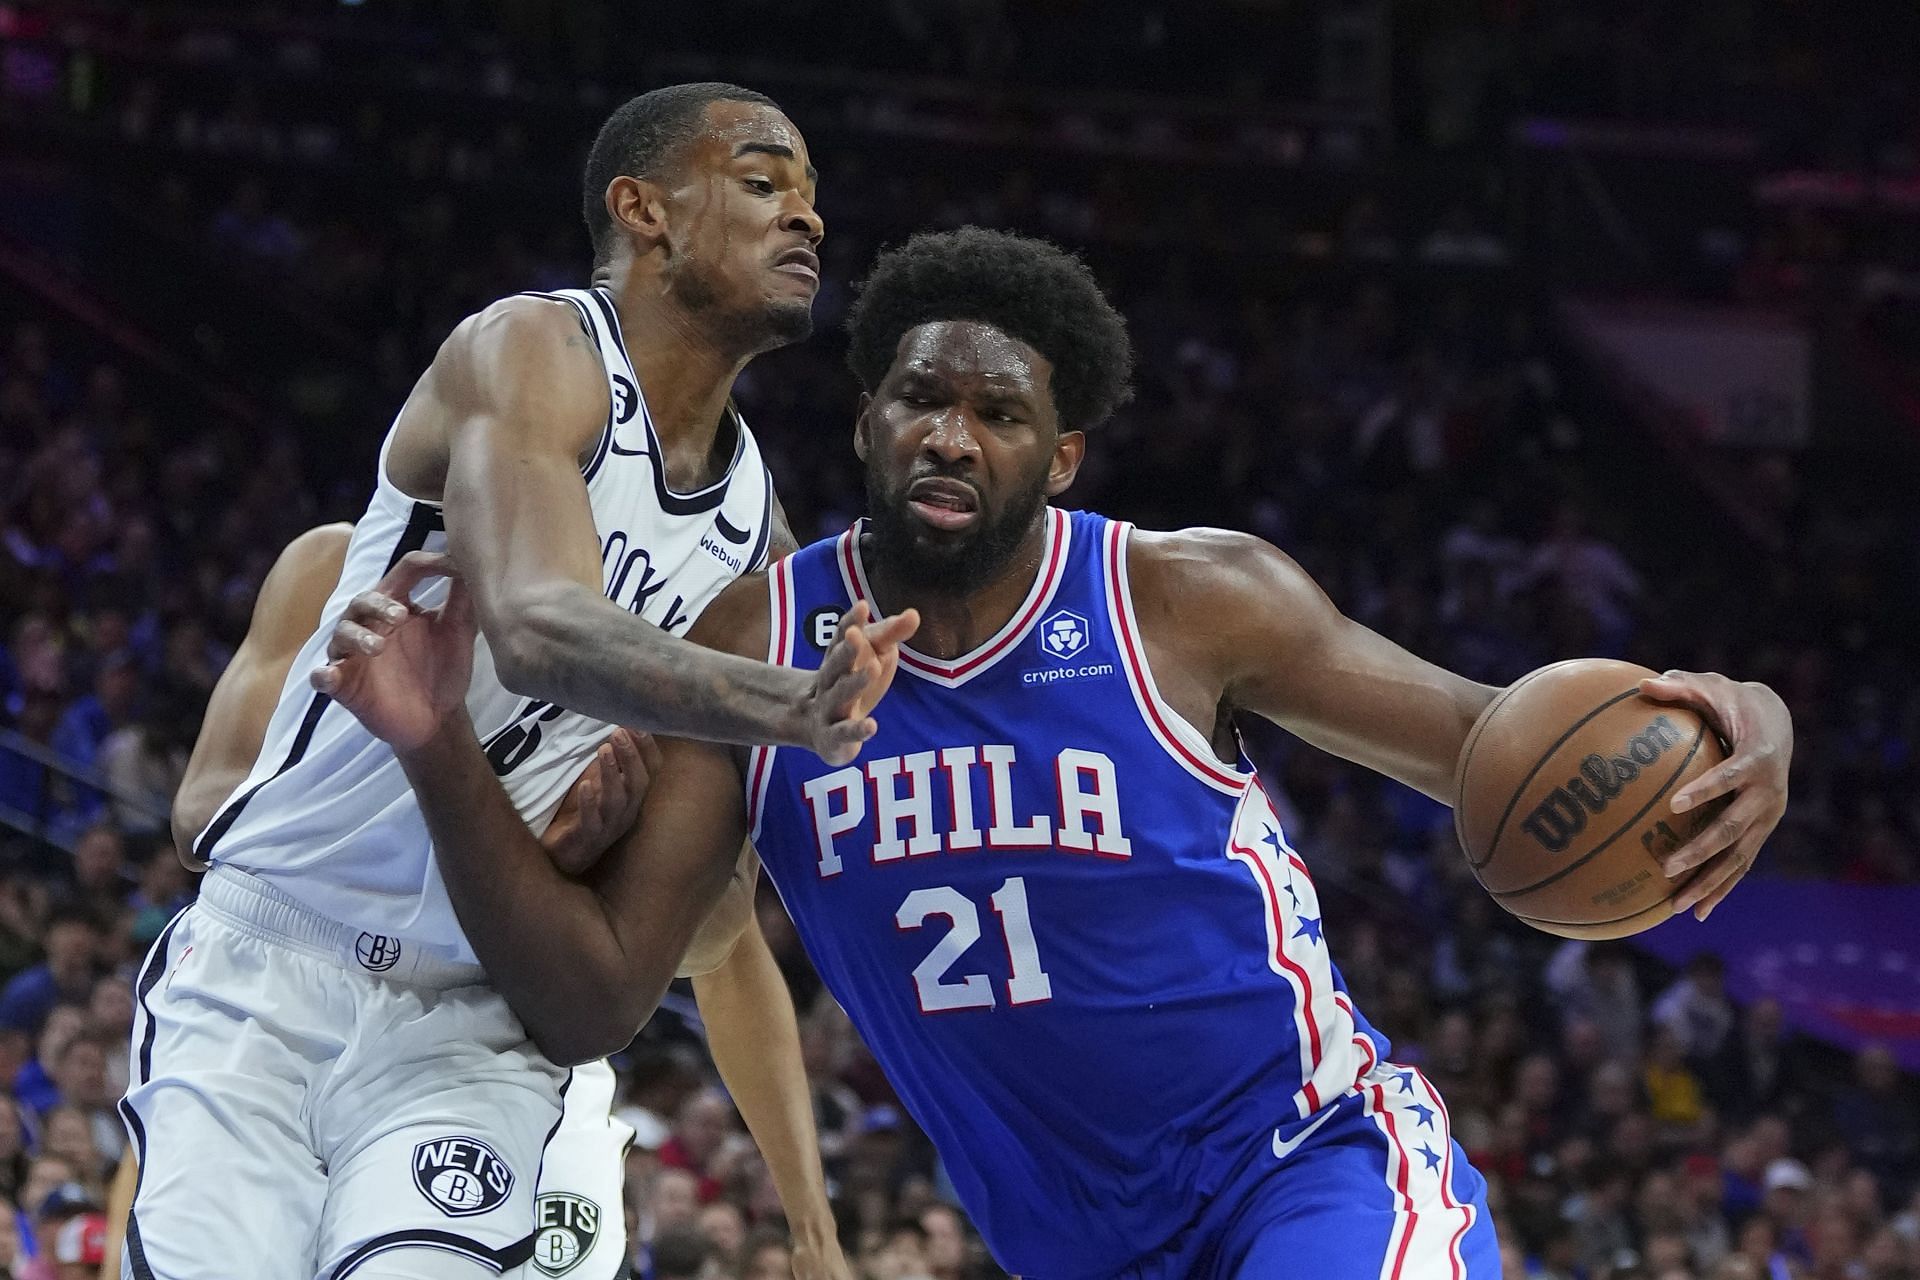 The 76ers sweep the Nets in the first round of the NBA playoffs